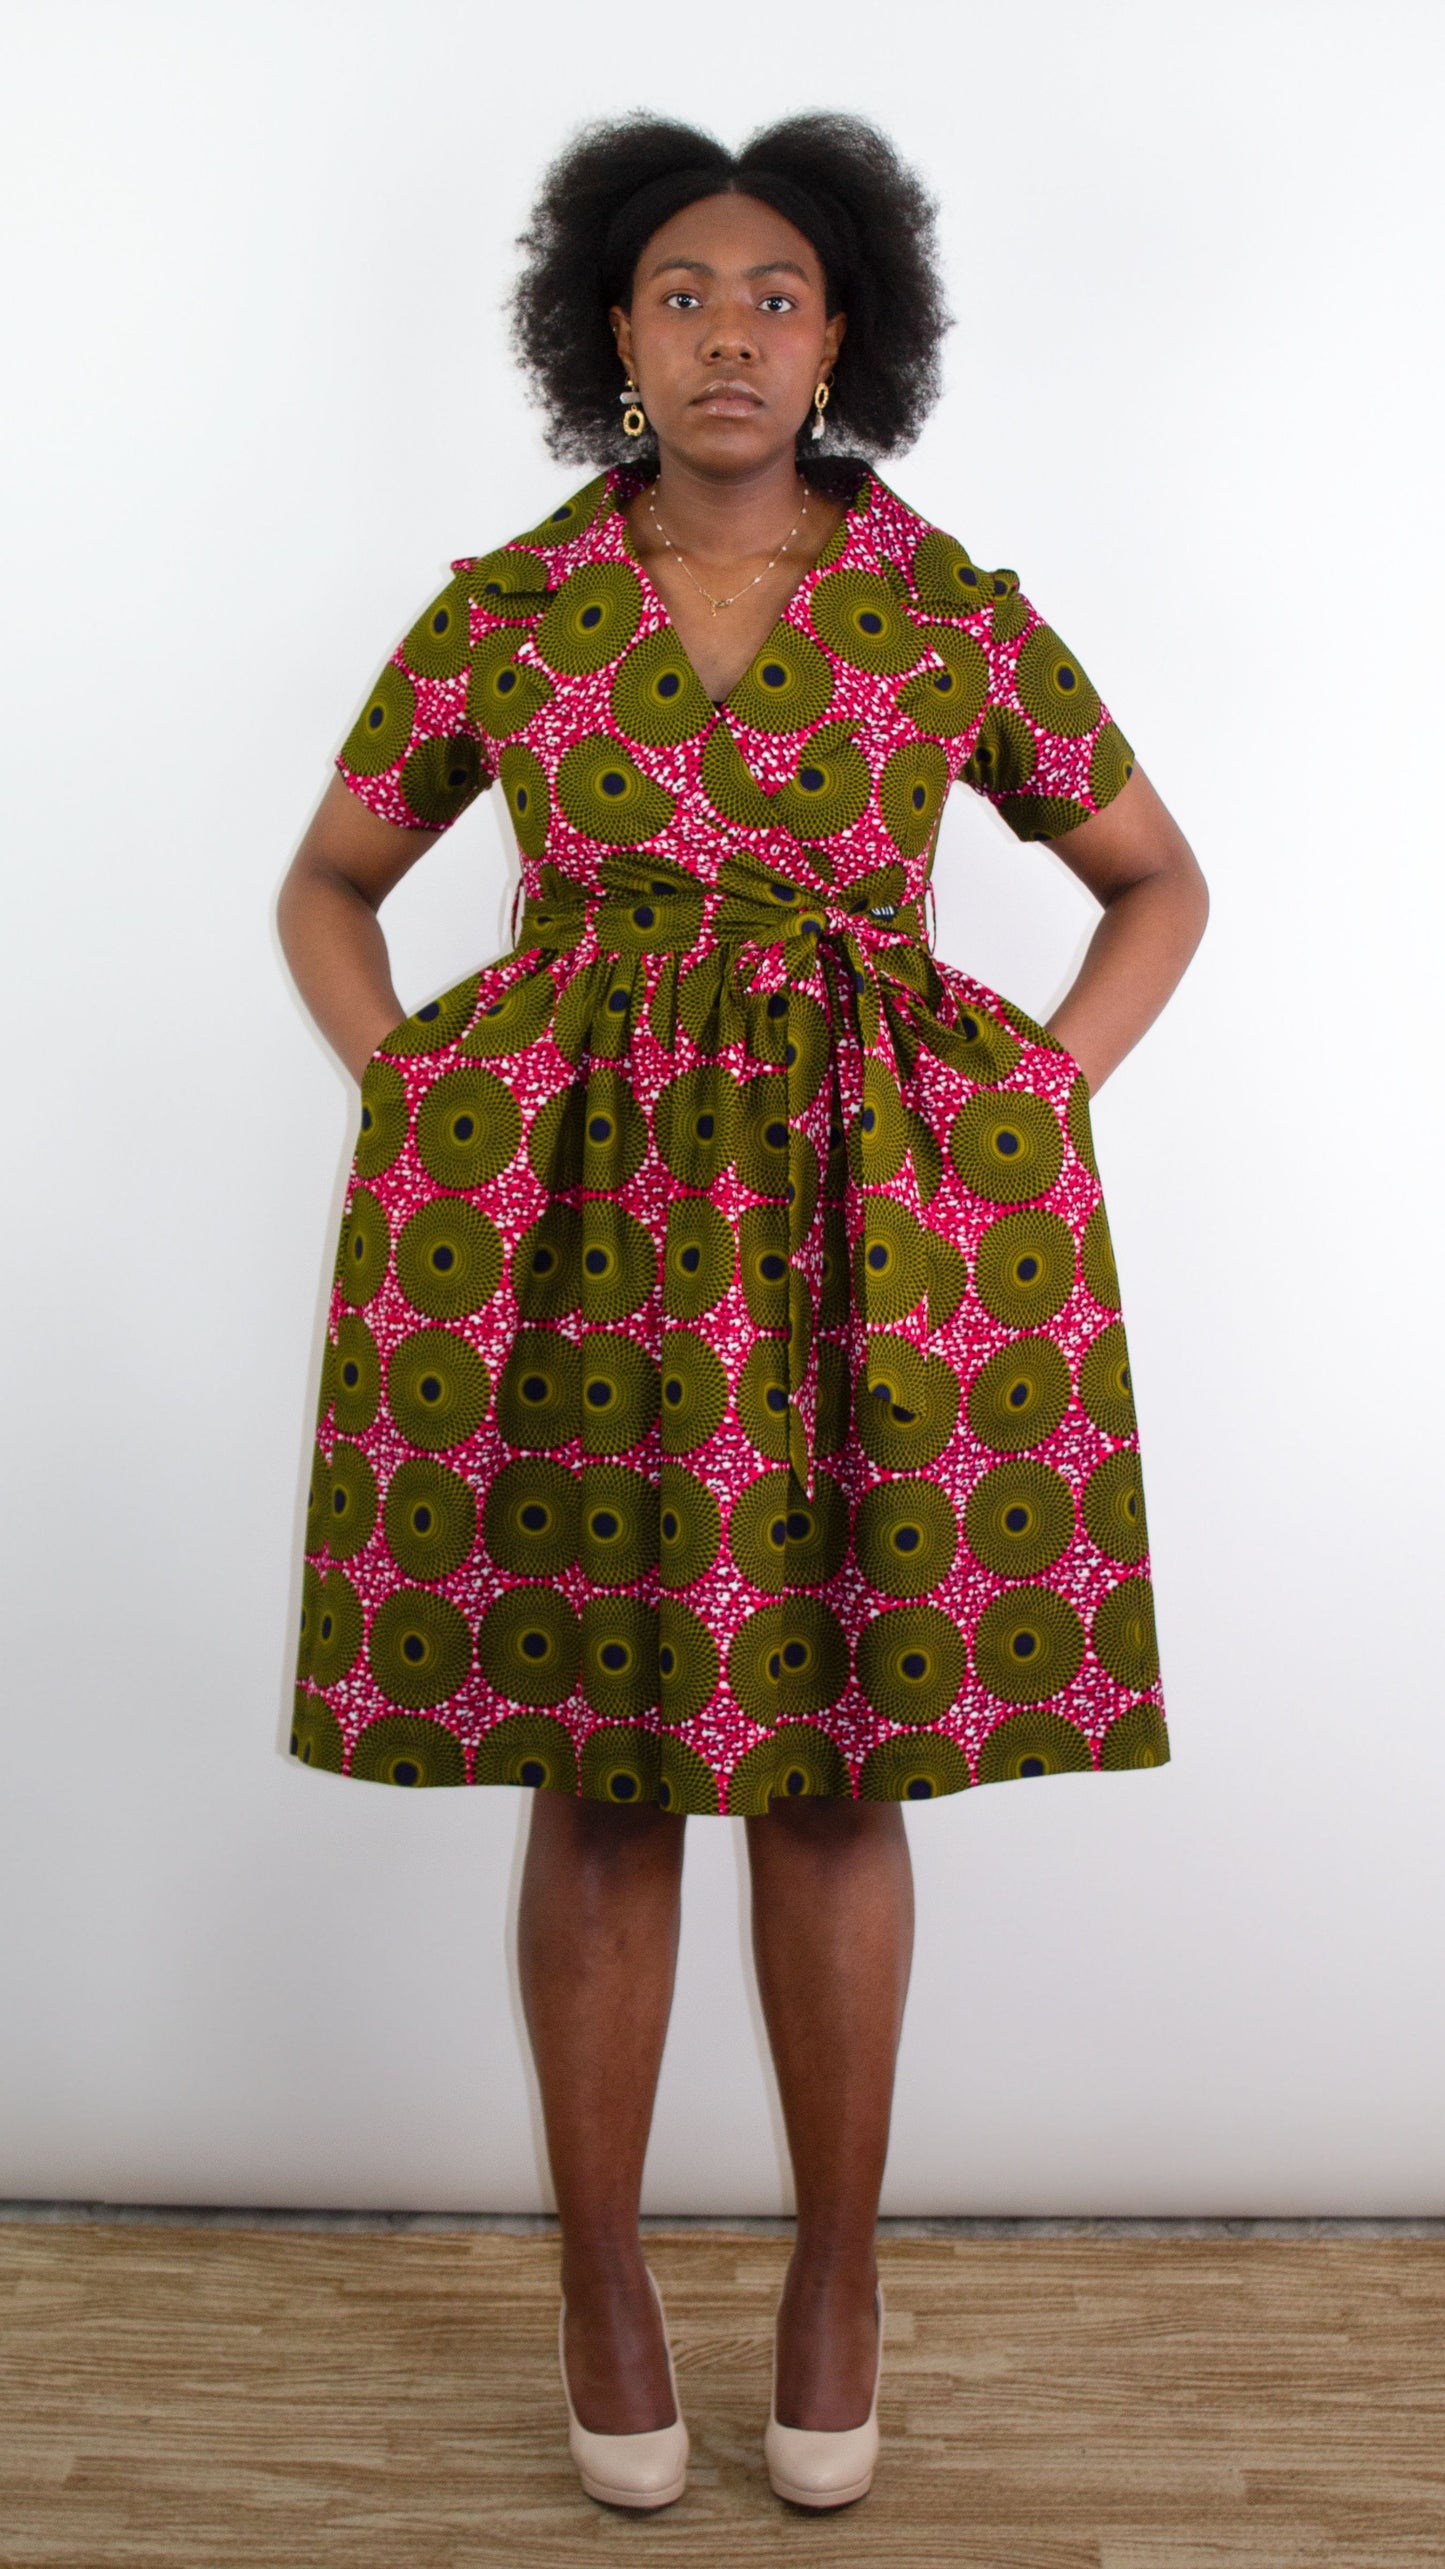 Model posing in the African Print 'Ripple Effect' Wrap Dress in pink fabric. Her hands are casually in the pockets and complemented by beige high heels.